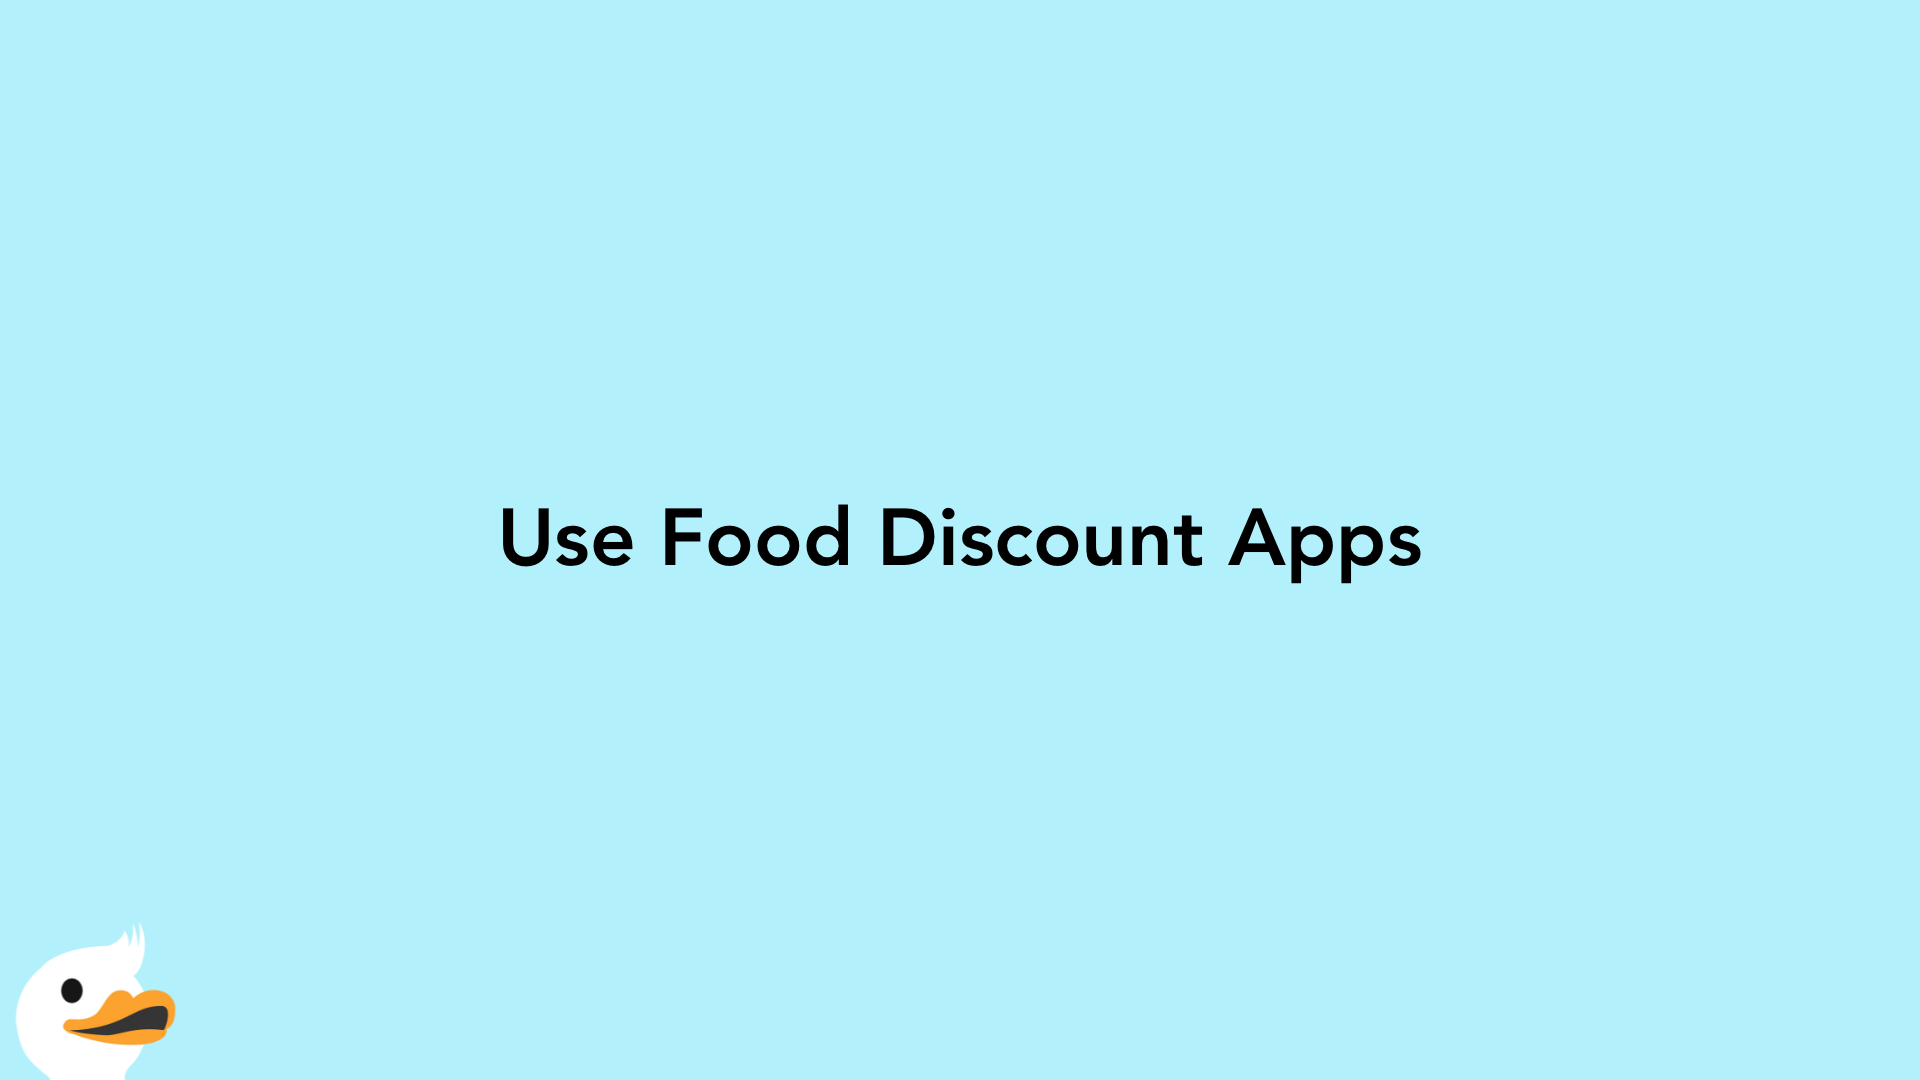 Use Food Discount Apps